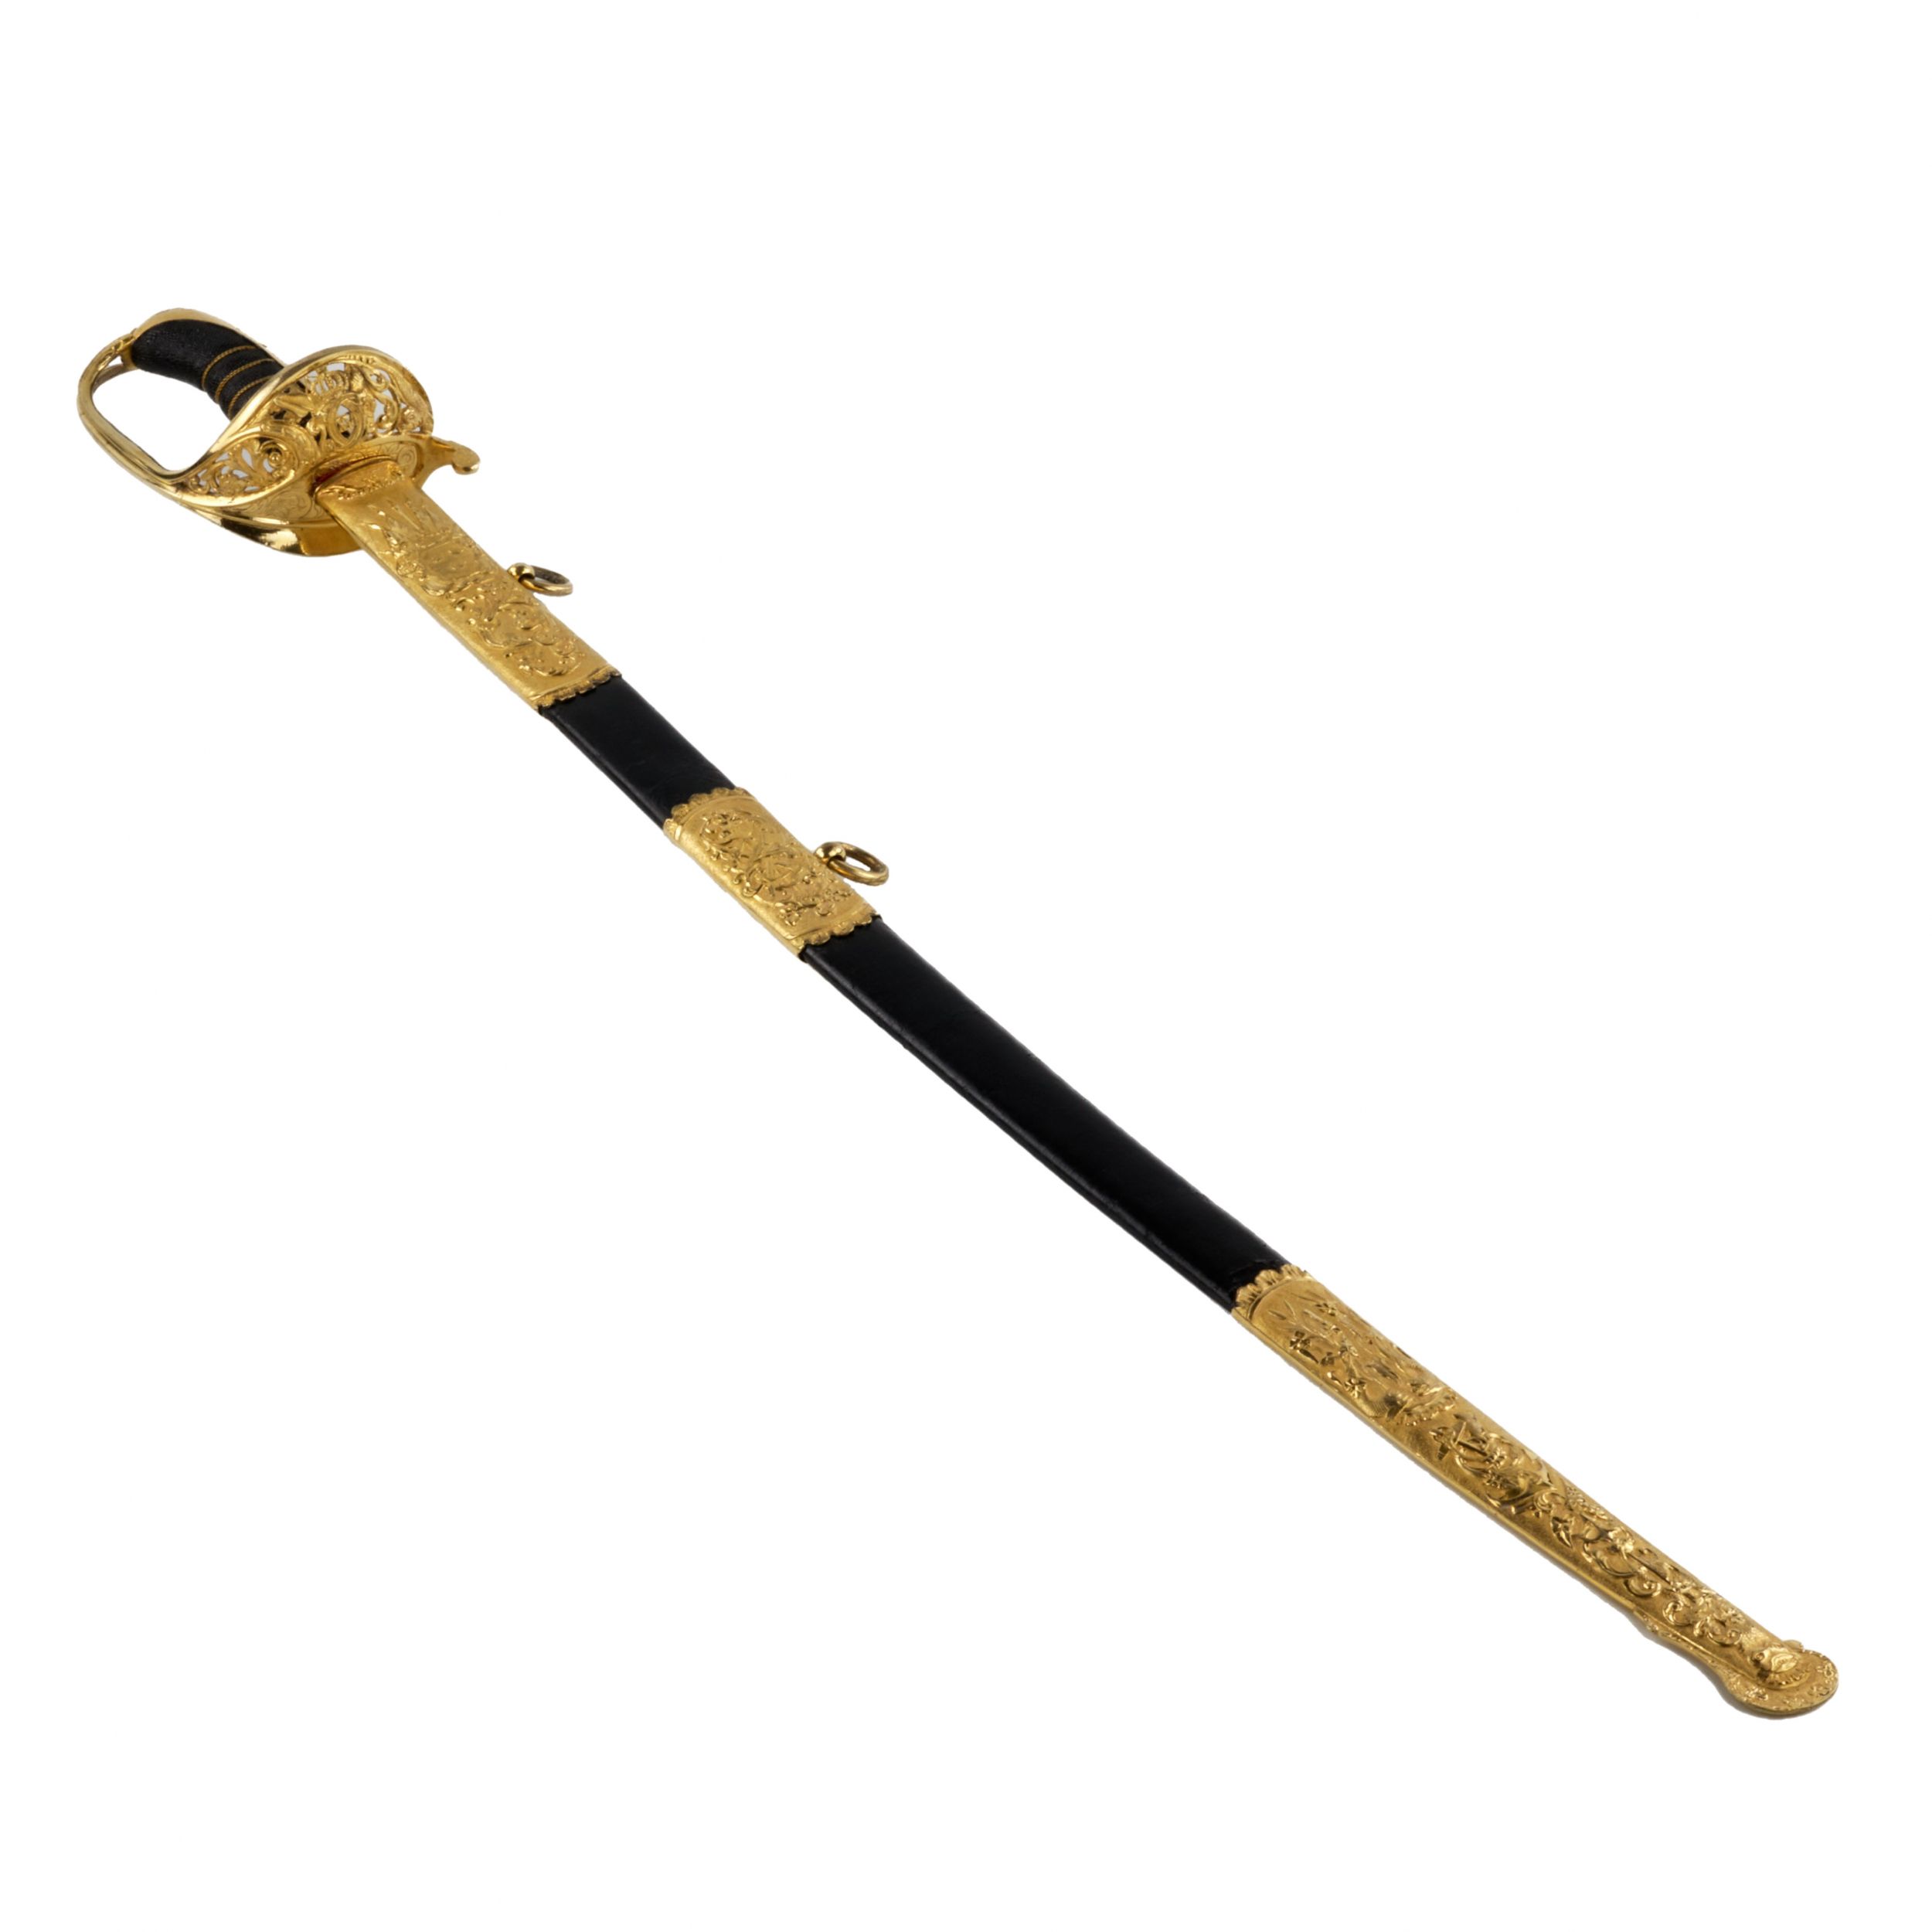 Saber-of-a-Swedish-naval-officer-second-half-of-the-19th-century